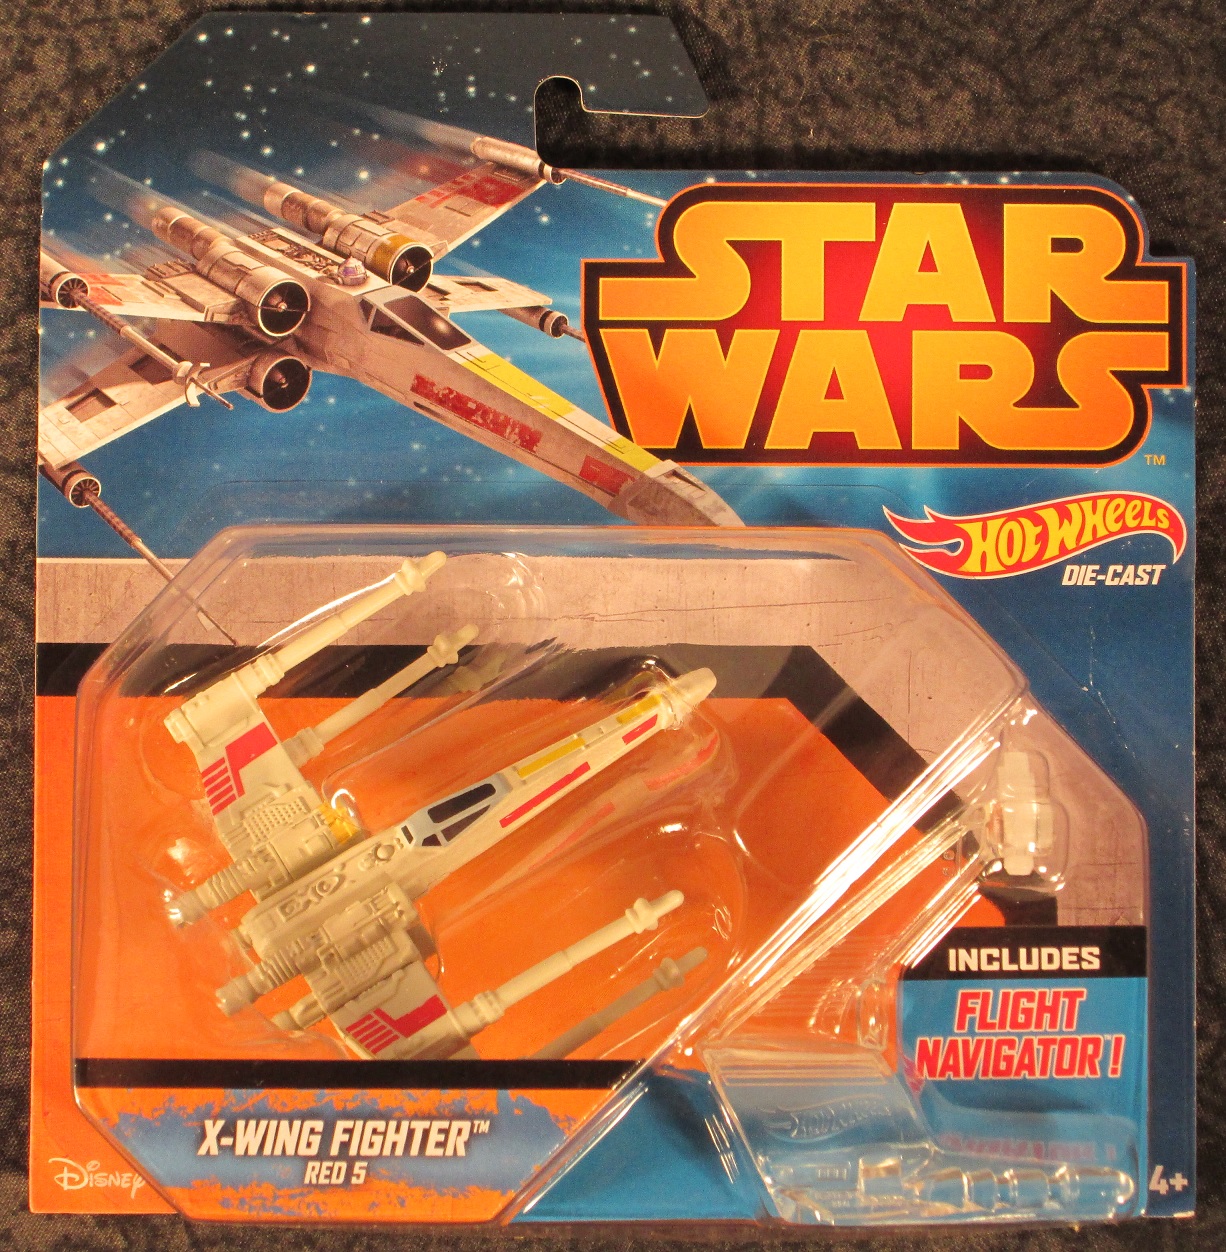 MATTEL HOT WHEELS VI & ROGUE ONE STAR WARS EPISODE IV X-WING FIGHTER RED 5 